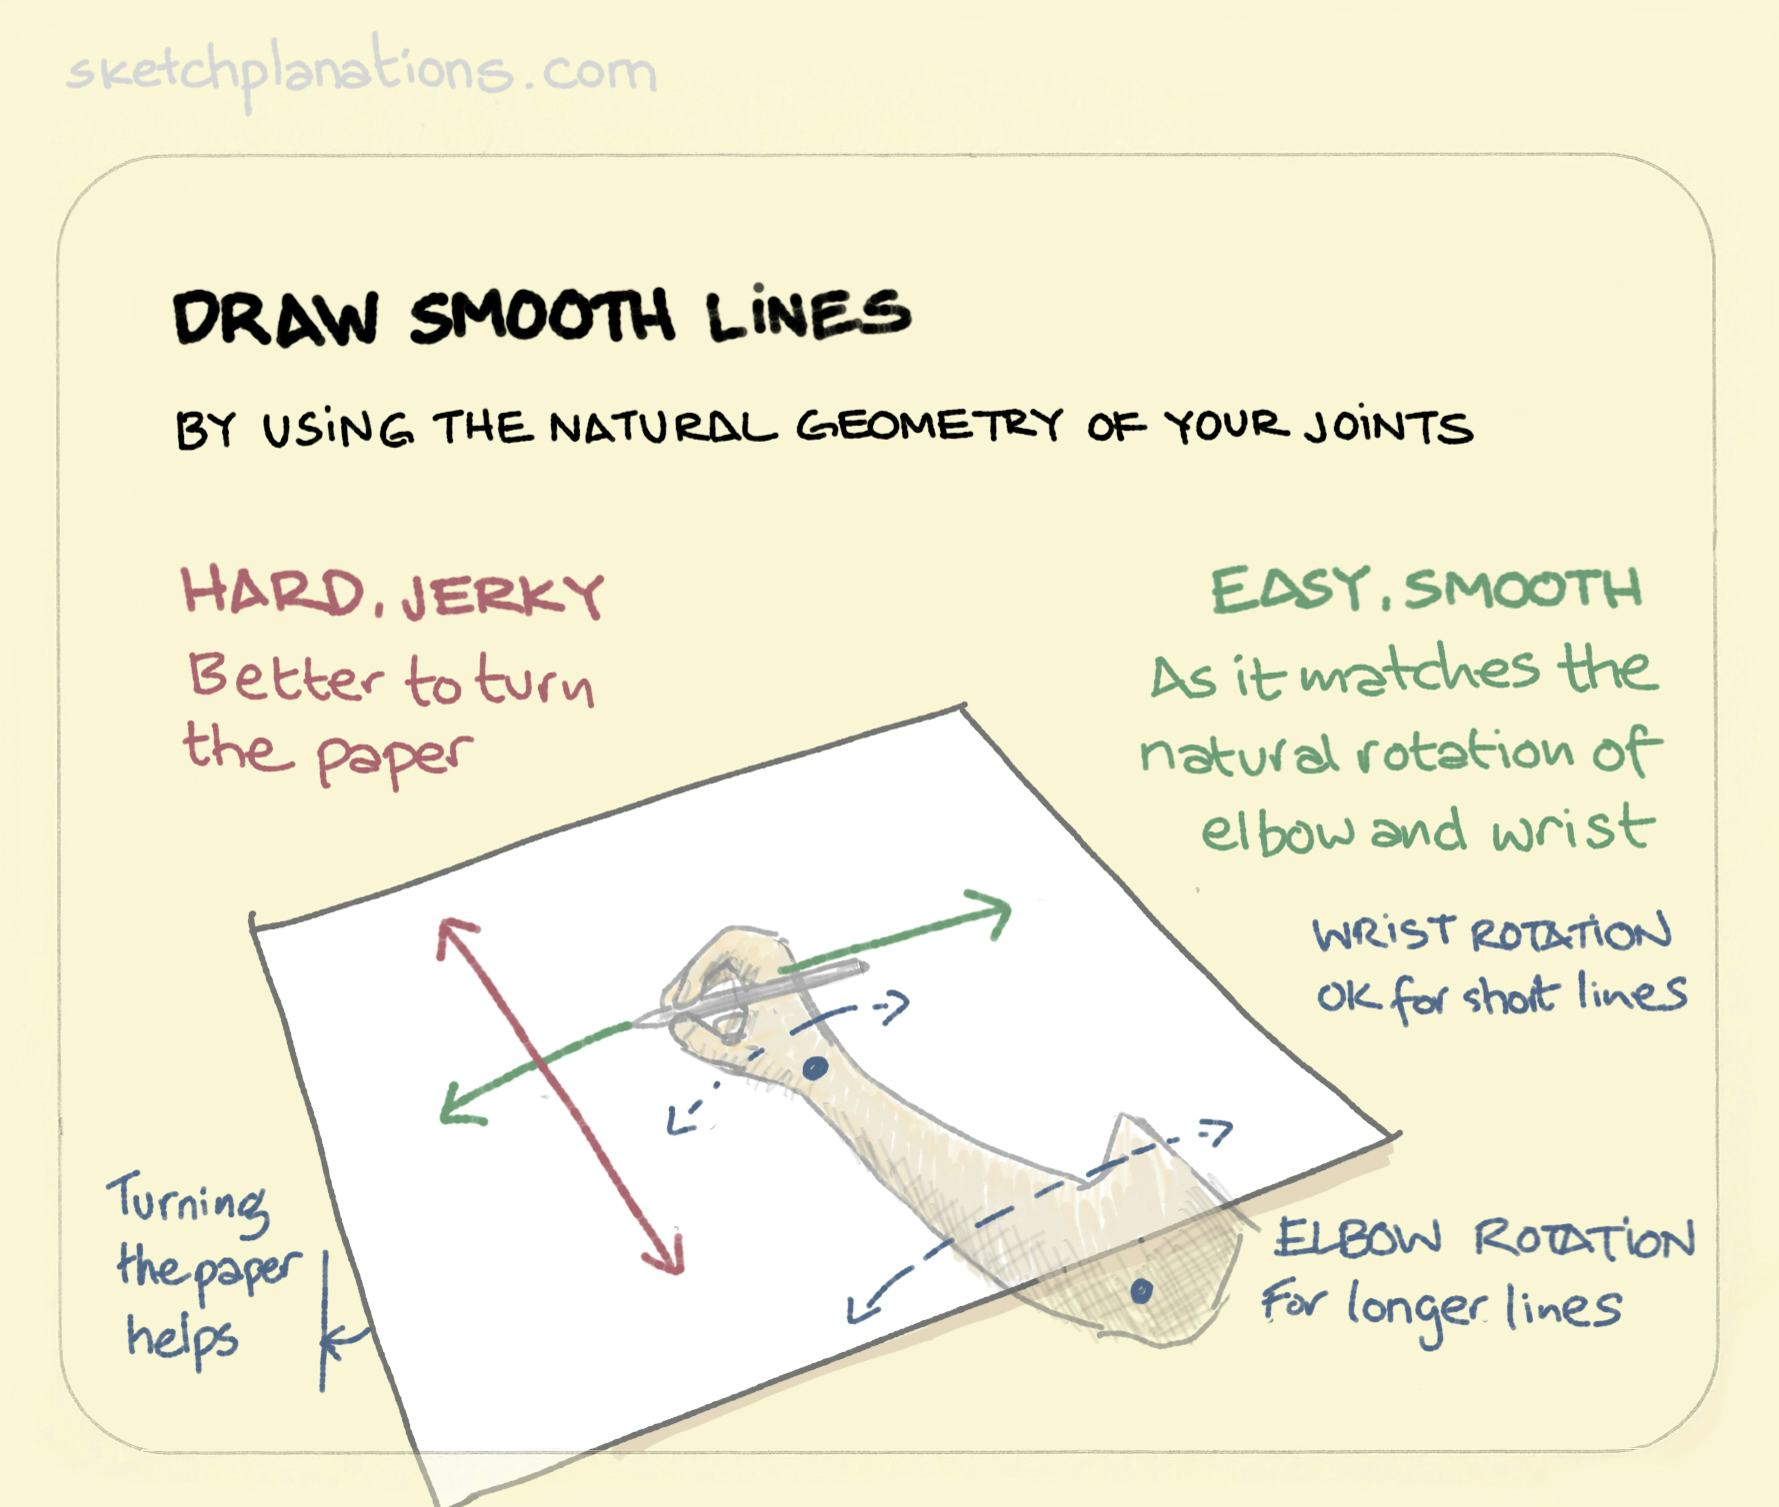 Draw smooth lines - Sketchplanations